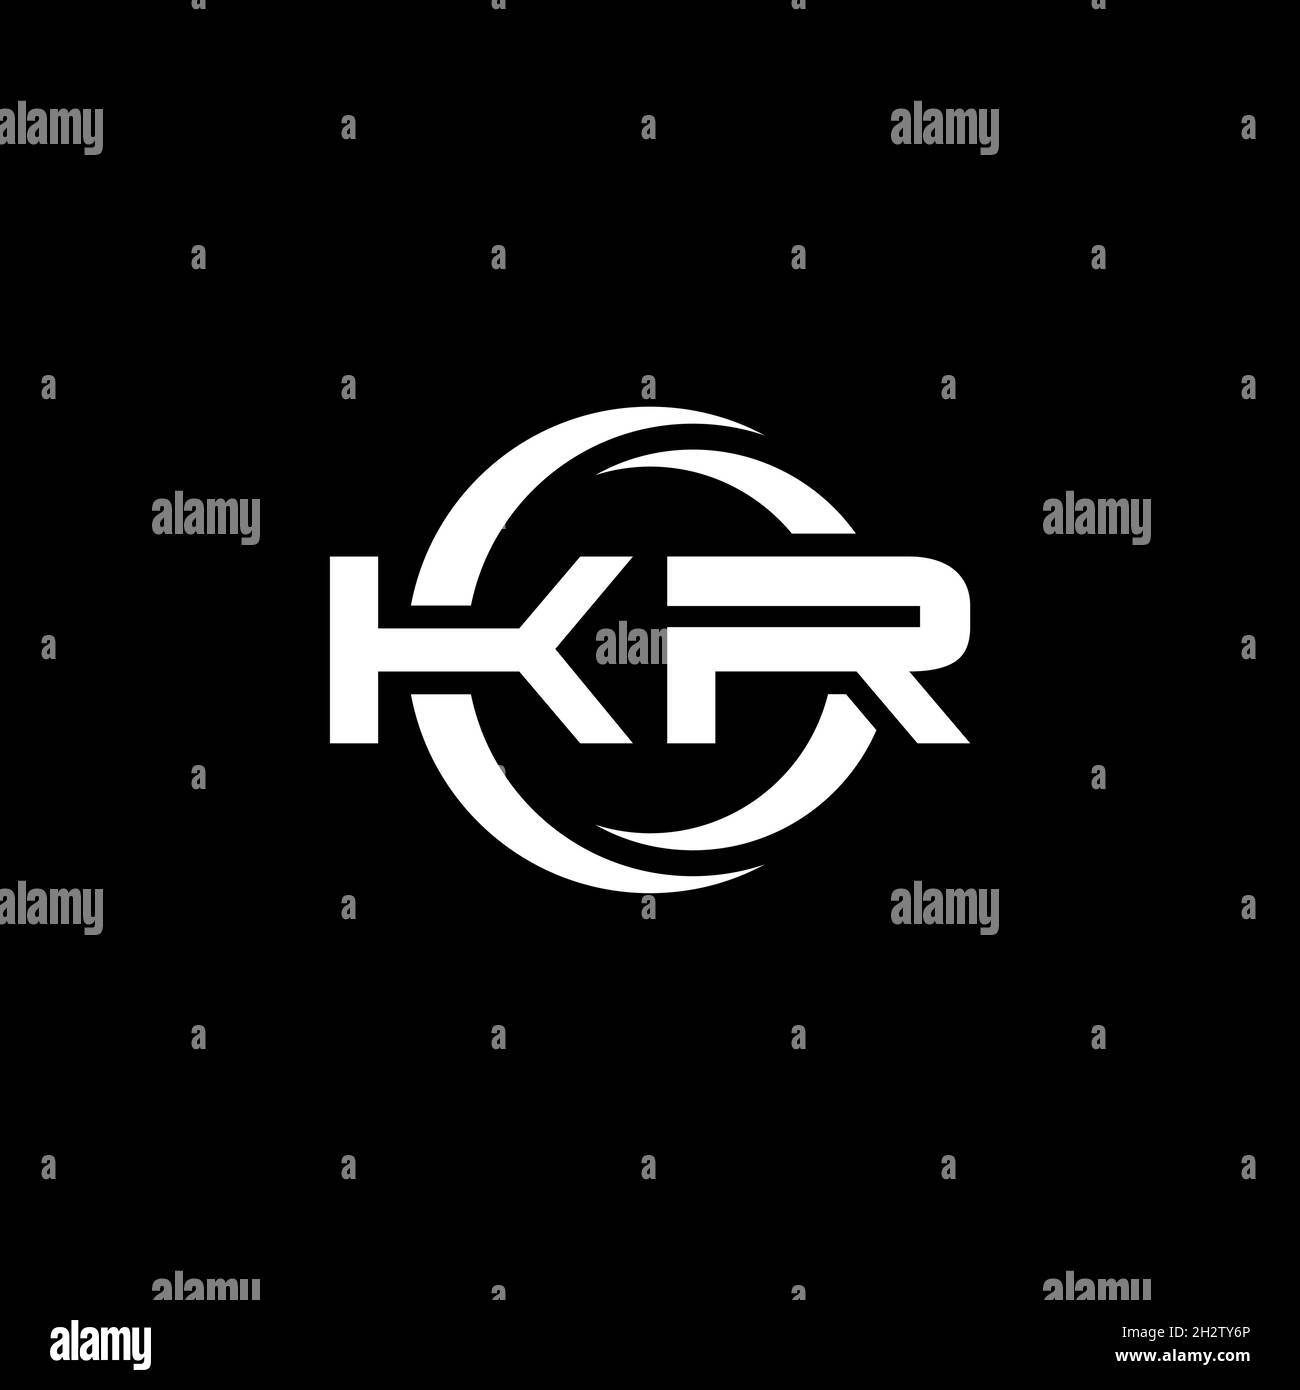 KR Monogram logo letter with simple shape and circle rounded design template isolated on black background Stock Vector